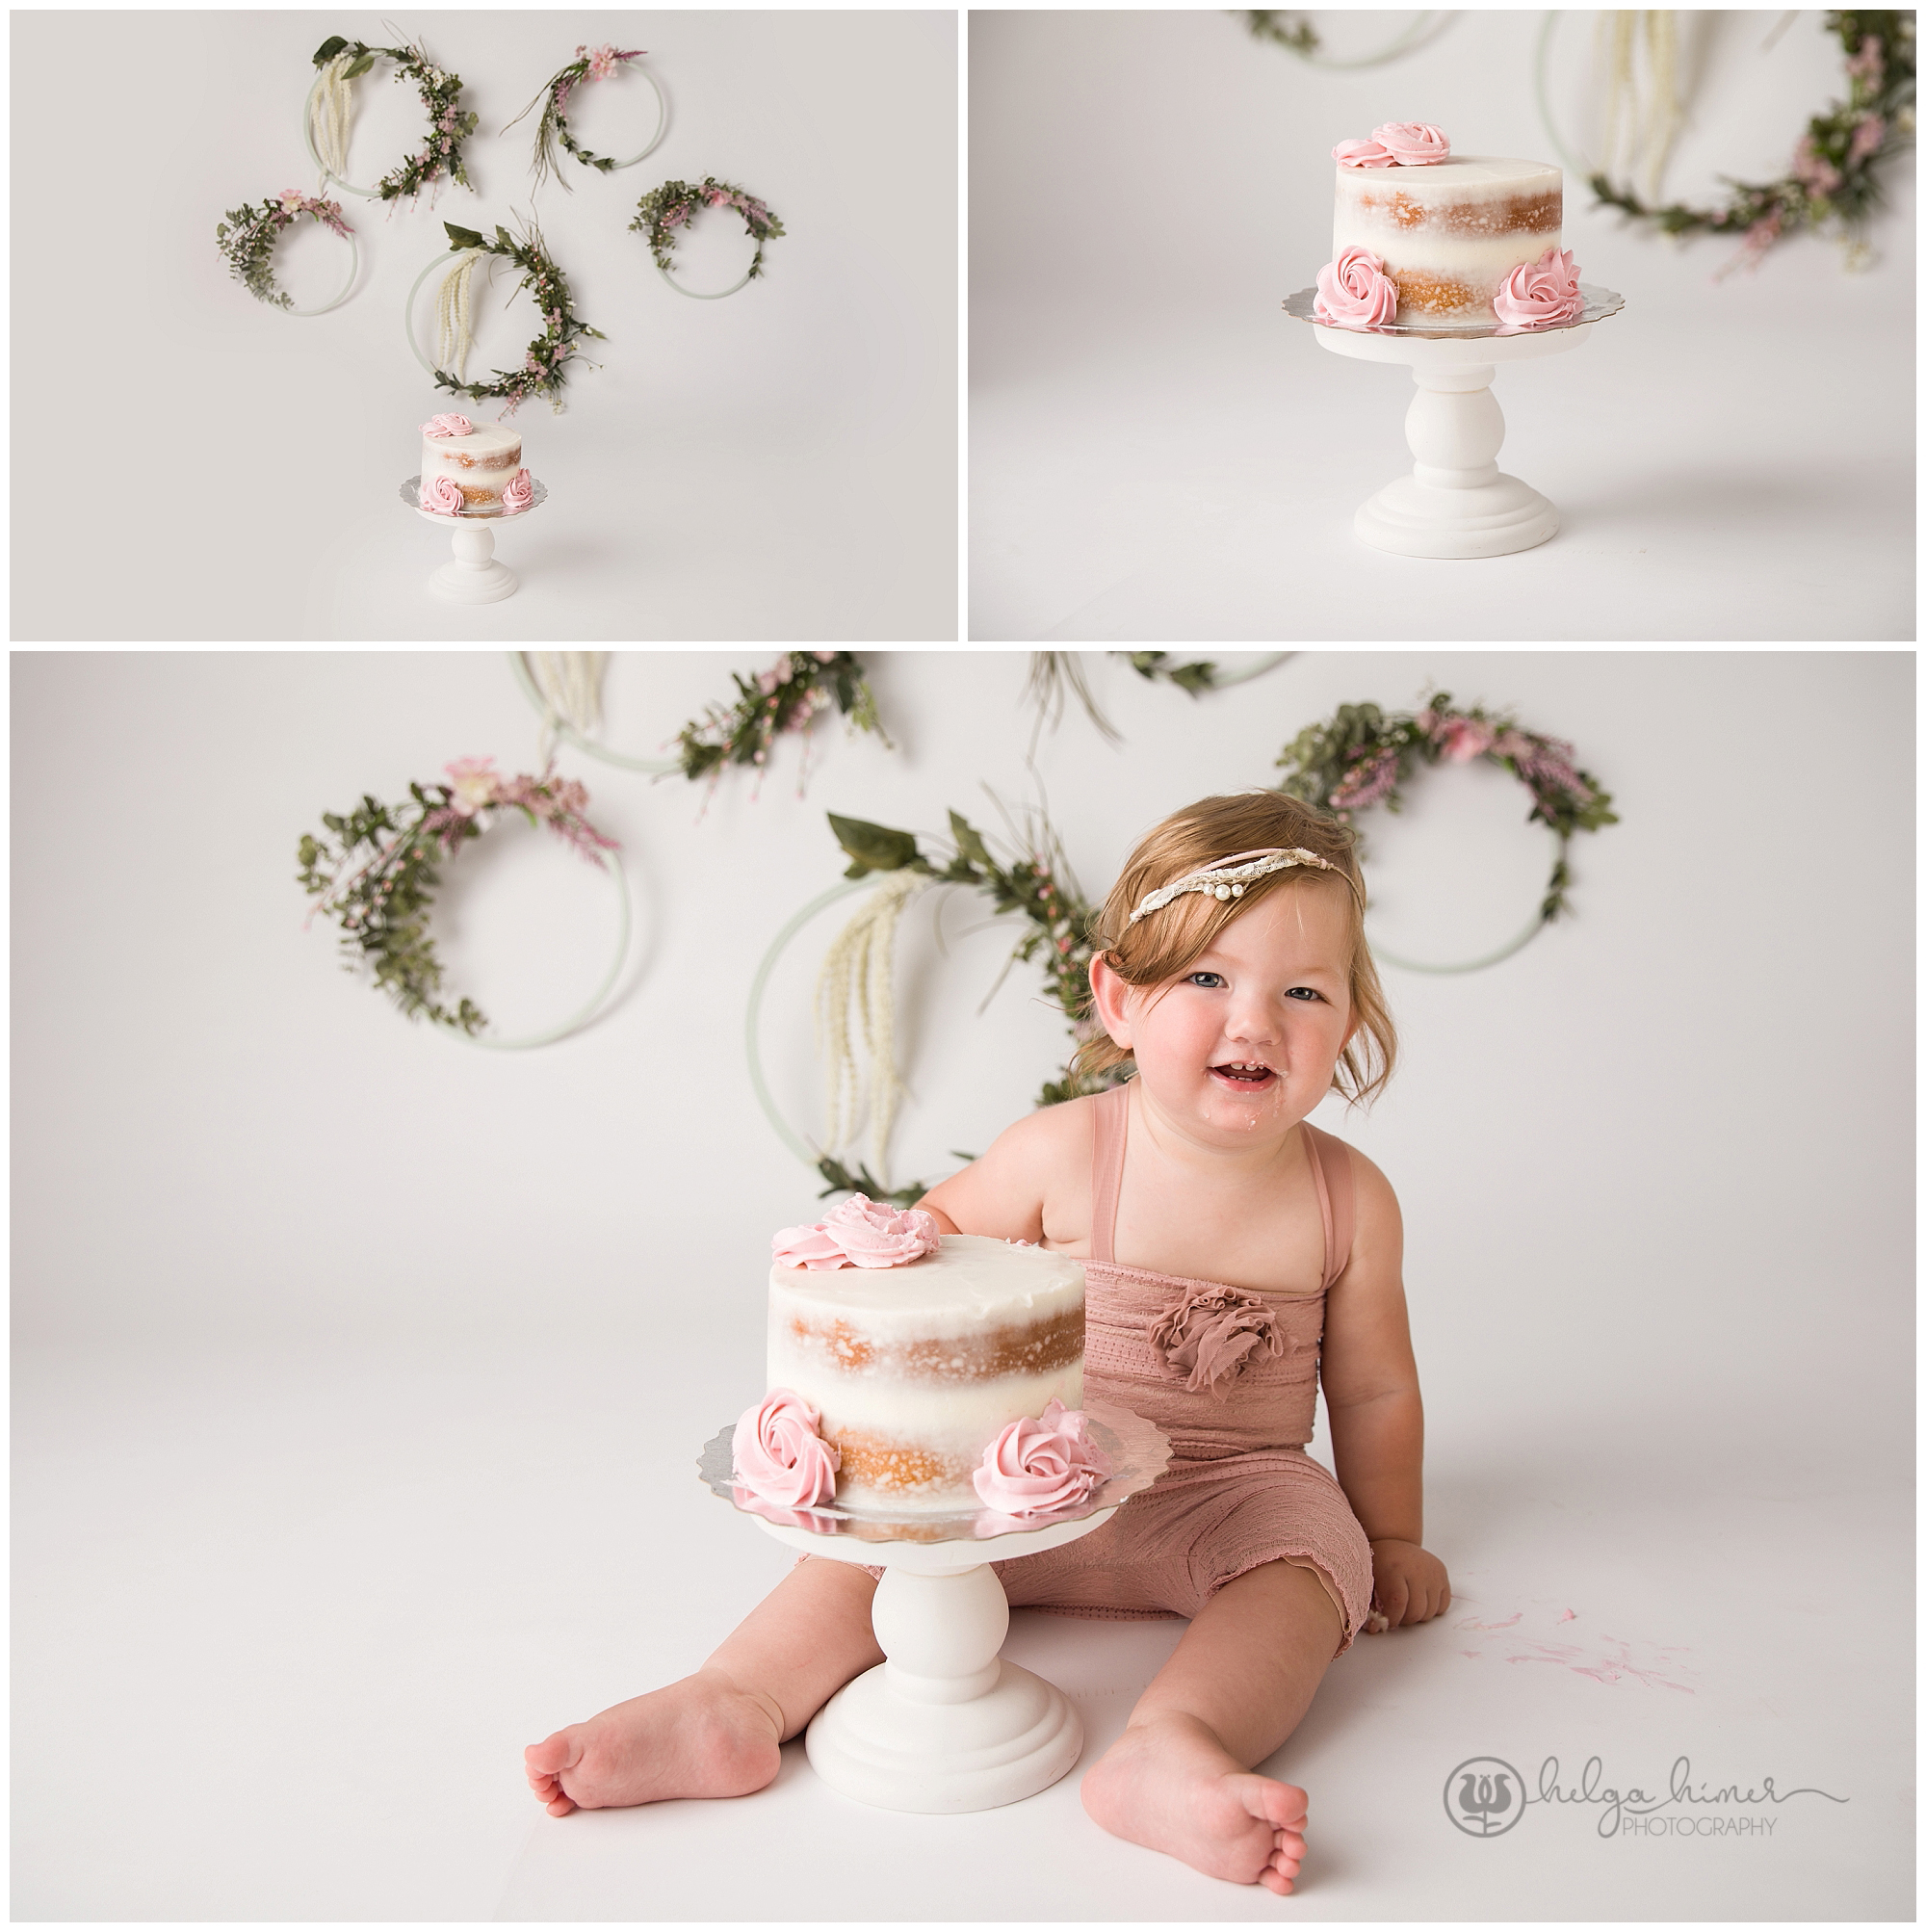 boho styled cake with a baby in pink rumper